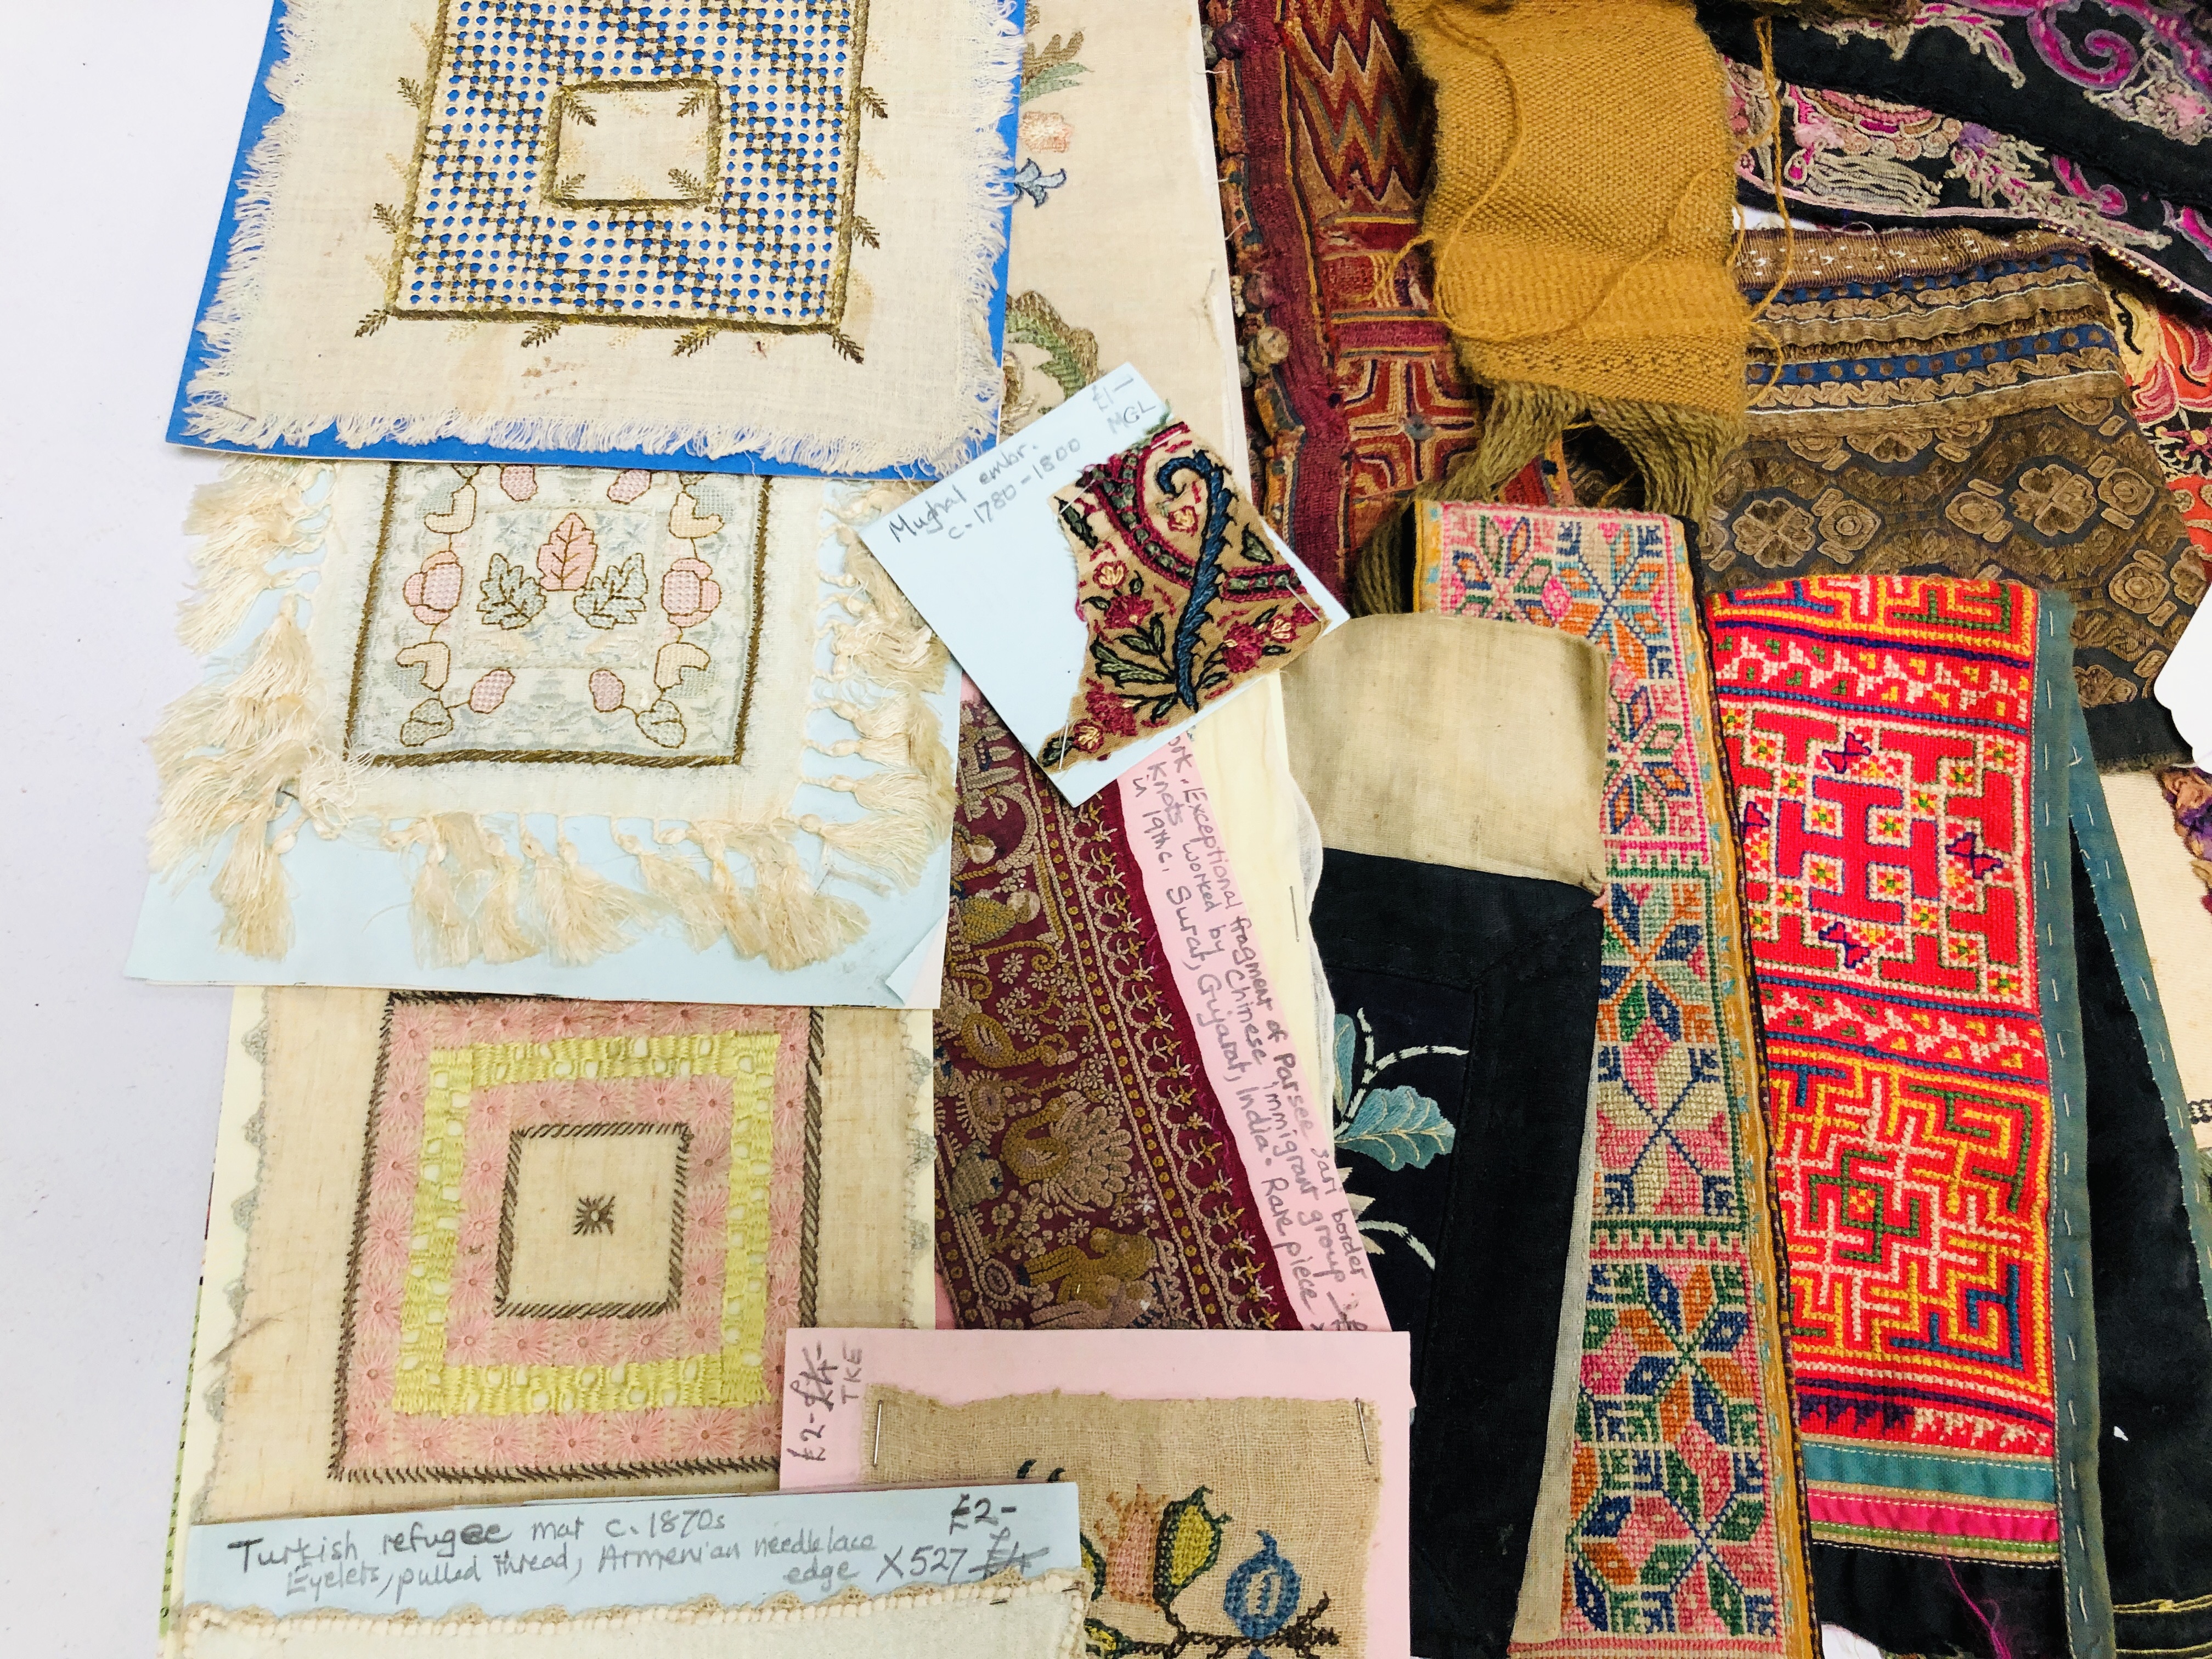 TWO BOXES CONTAINING AN EXTENSIVE COLLECTION OF TEXTILES EXAMPLES. - Image 3 of 8